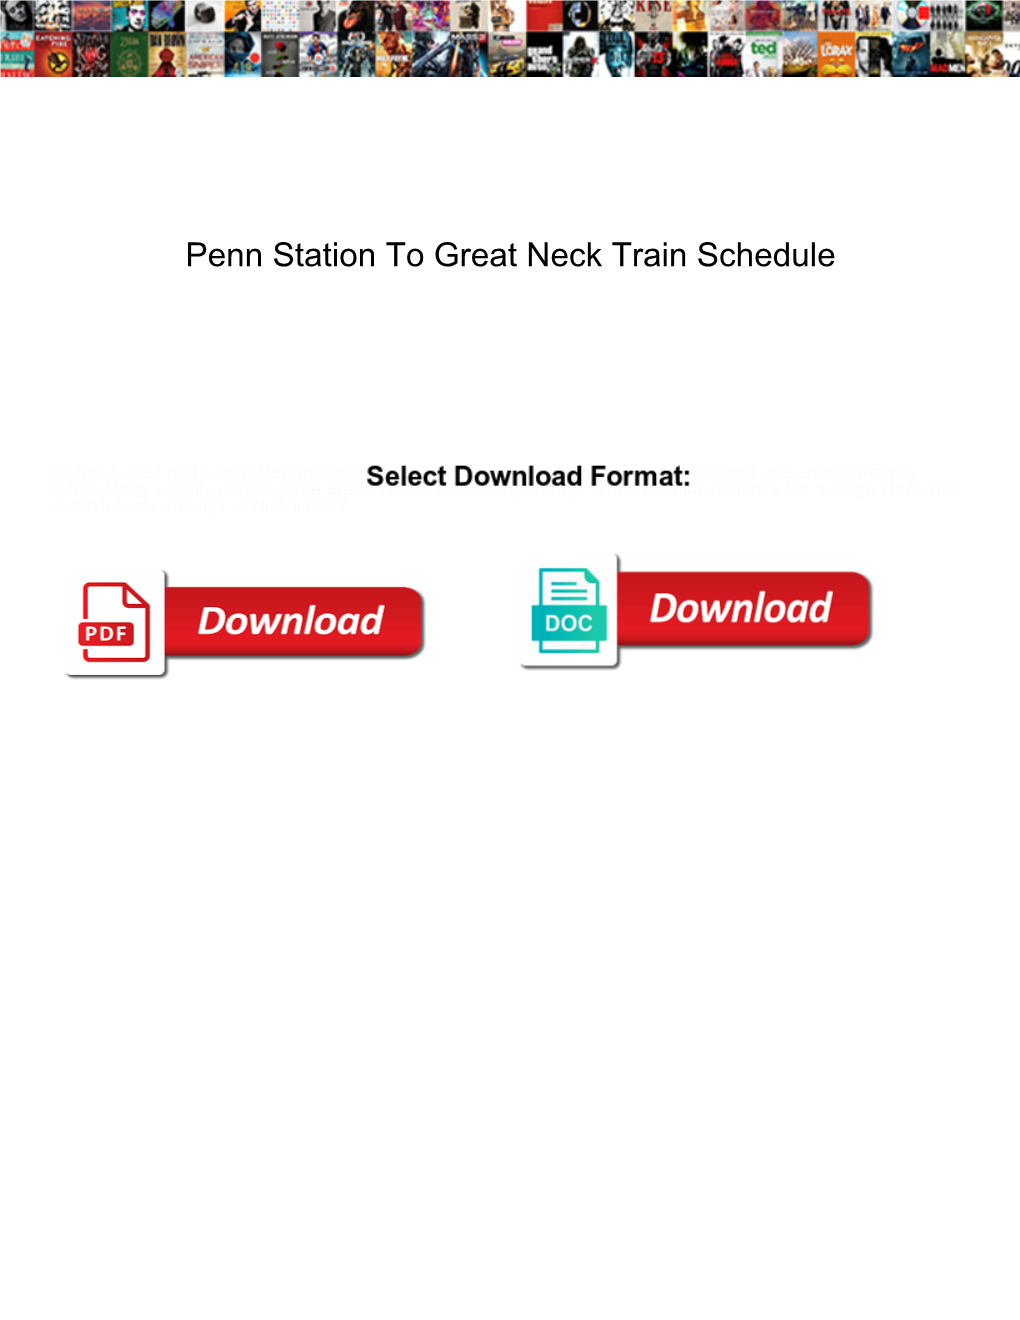 Penn Station to Great Neck Train Schedule